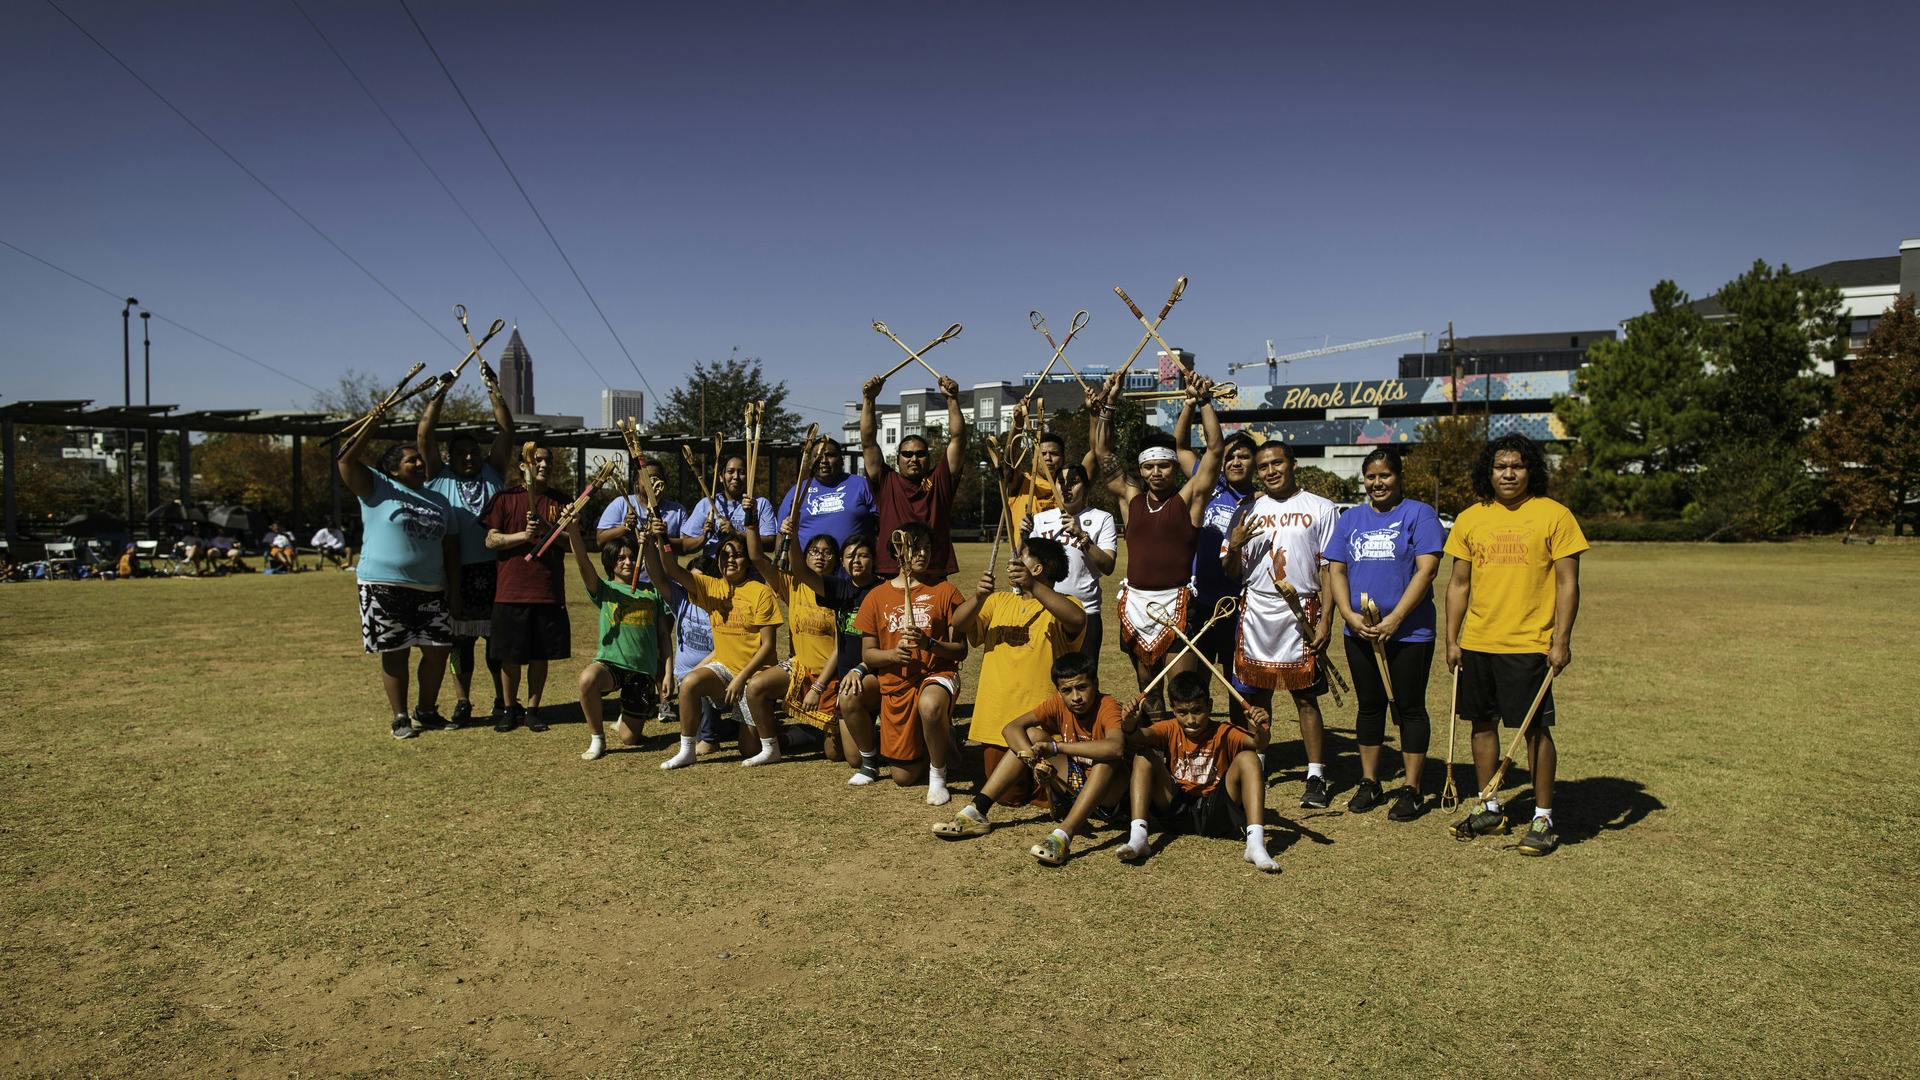 Members of Indigenous Nations pose together for a photo with their Stickball sticks on the activity field at the Historic Fourth Ward Skatepark.